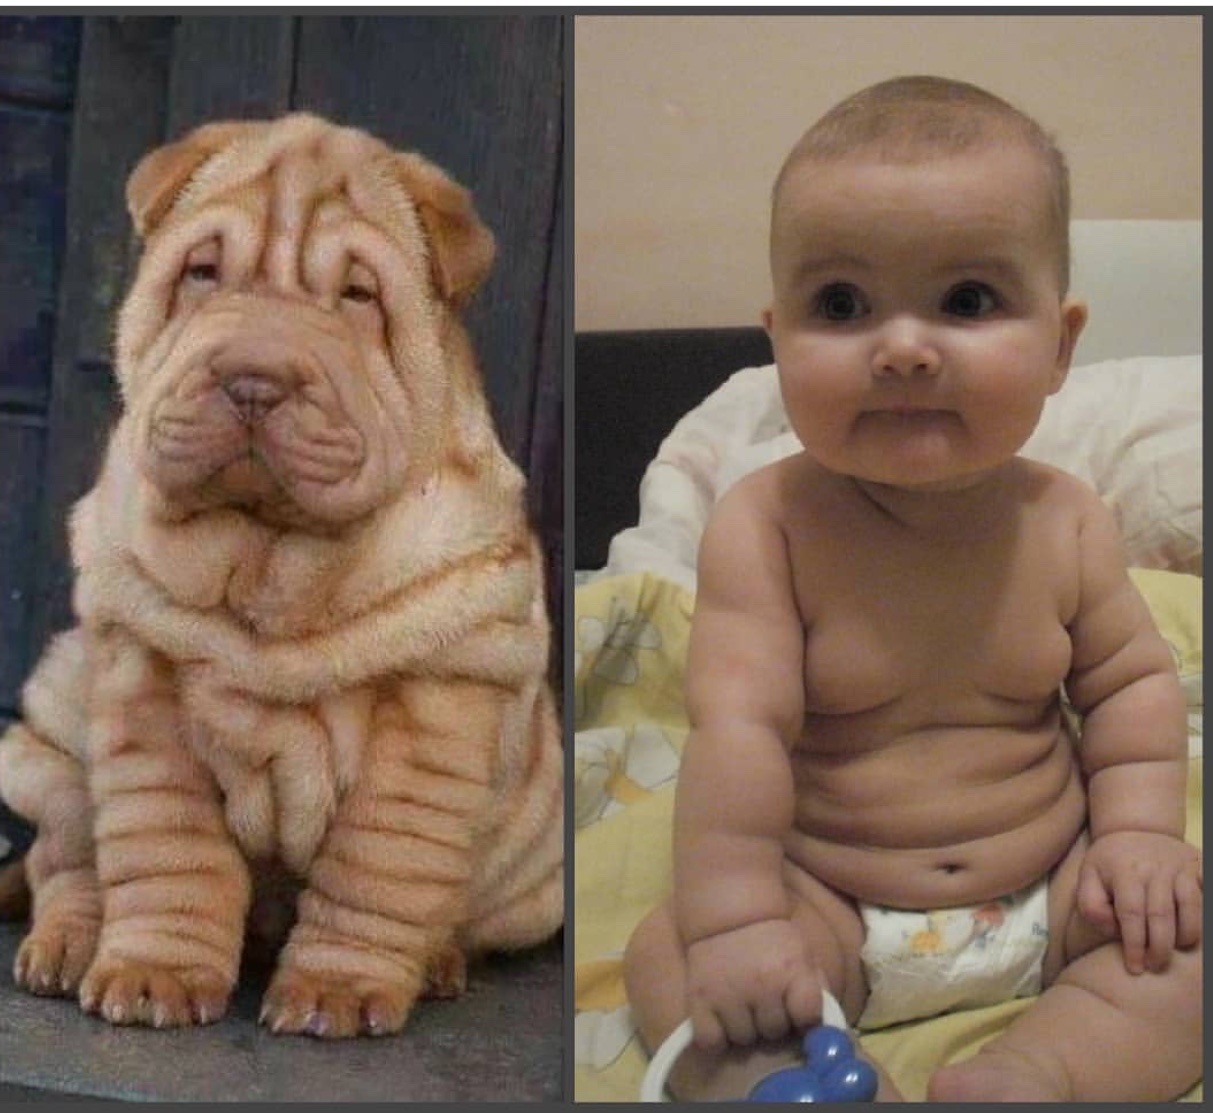 A Shar-Pei puppy sitting on the floor photo next to a photo of a child sitting on the bed showing its belly rolls